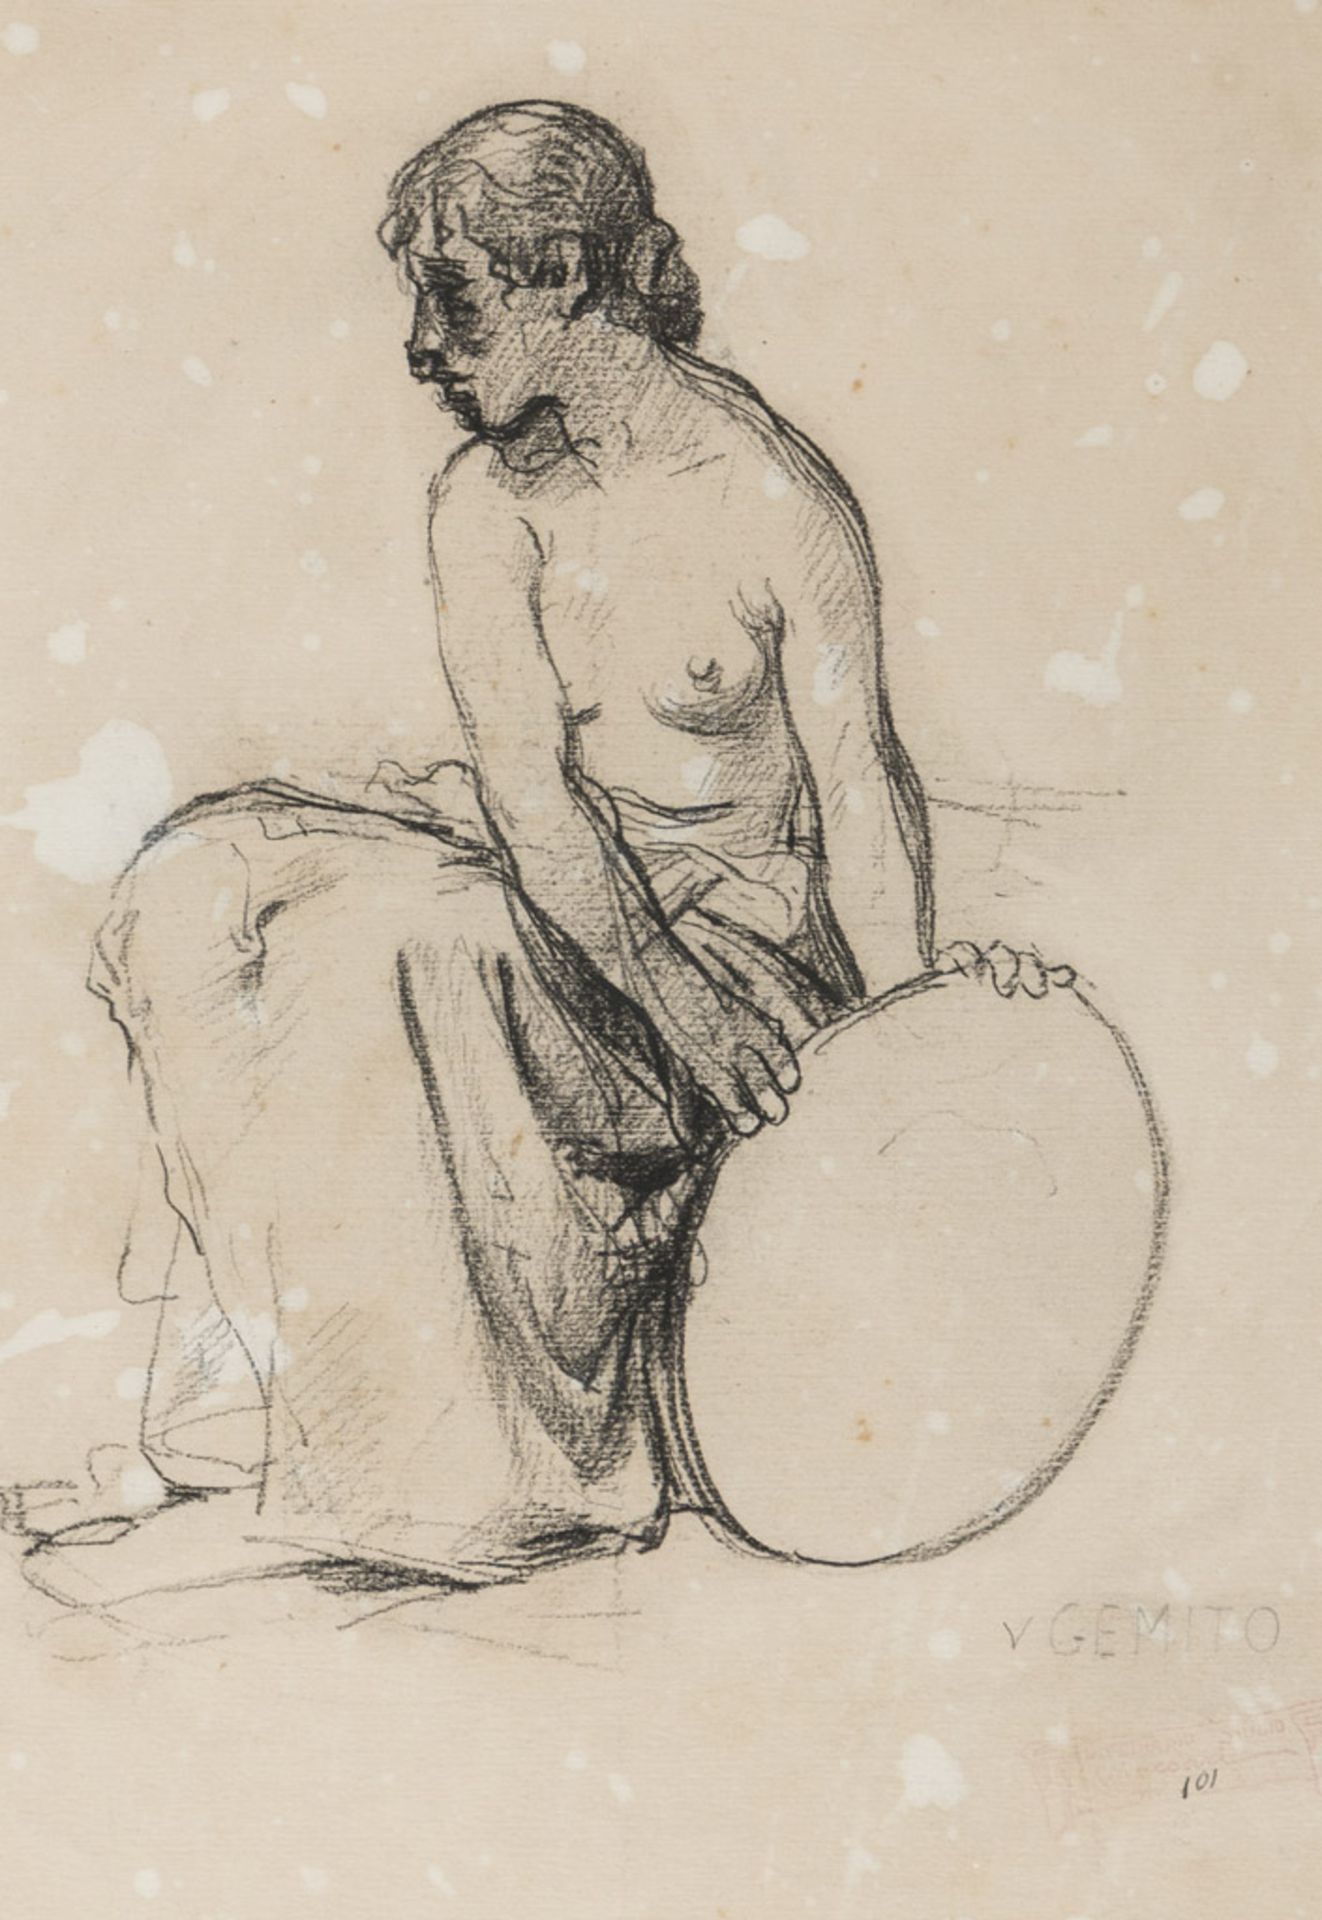 ITALIAN PAINTER, 19TH CENTURY STUDY OF FIGURE Charcoal on paper, cm. 26 x 18 Charcoal sketch on